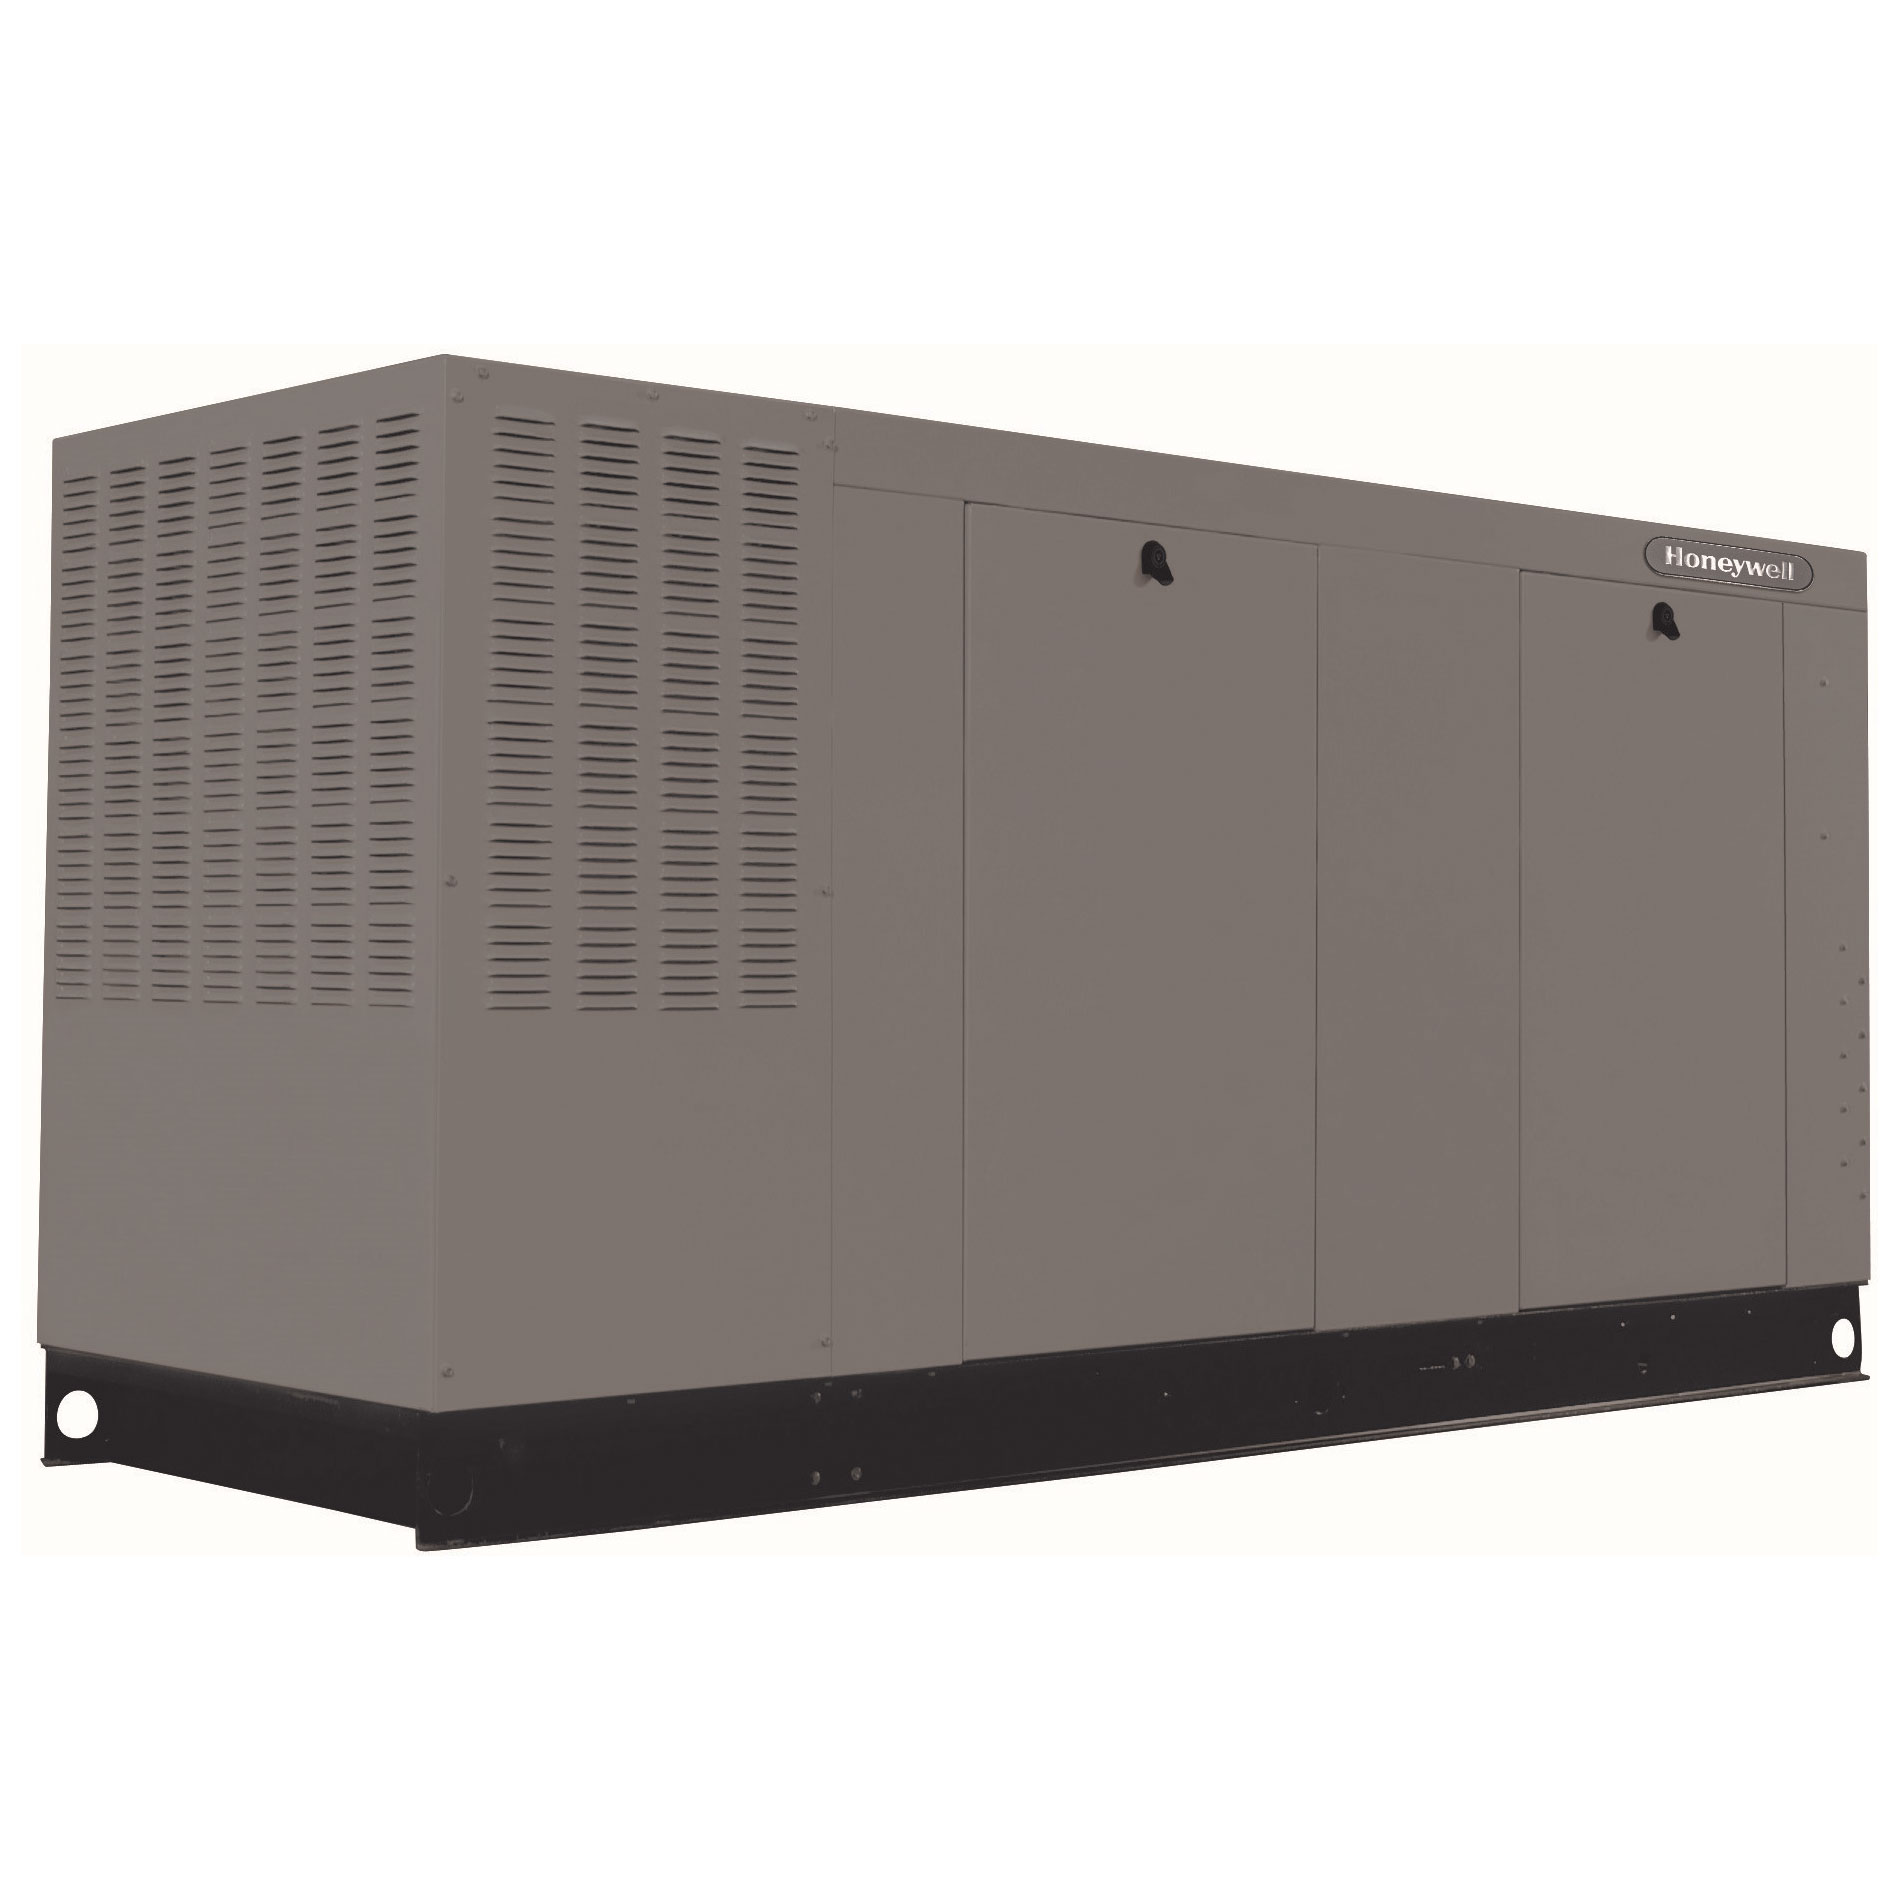 Honeywell 100kW Liquid Cooled Commercial Generator - HG10090C (SCAQMD Compliant)